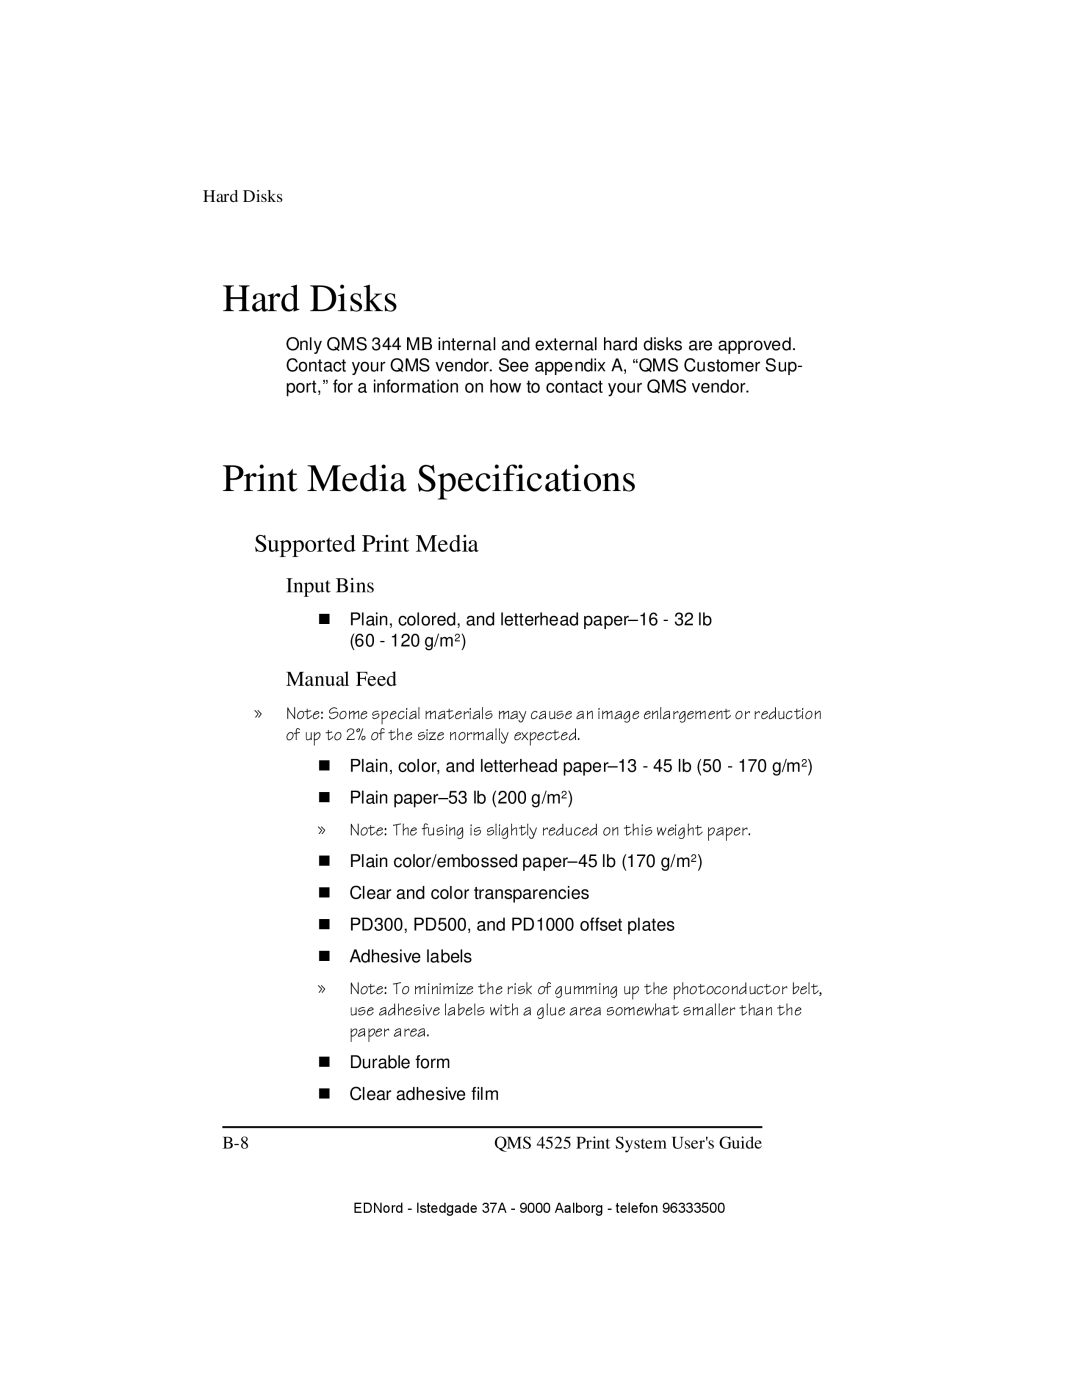 IBM QMS 4525 manual Hard Disks, Print Media Specifications, Supported Print Media, Input Bins, Manual Feed 